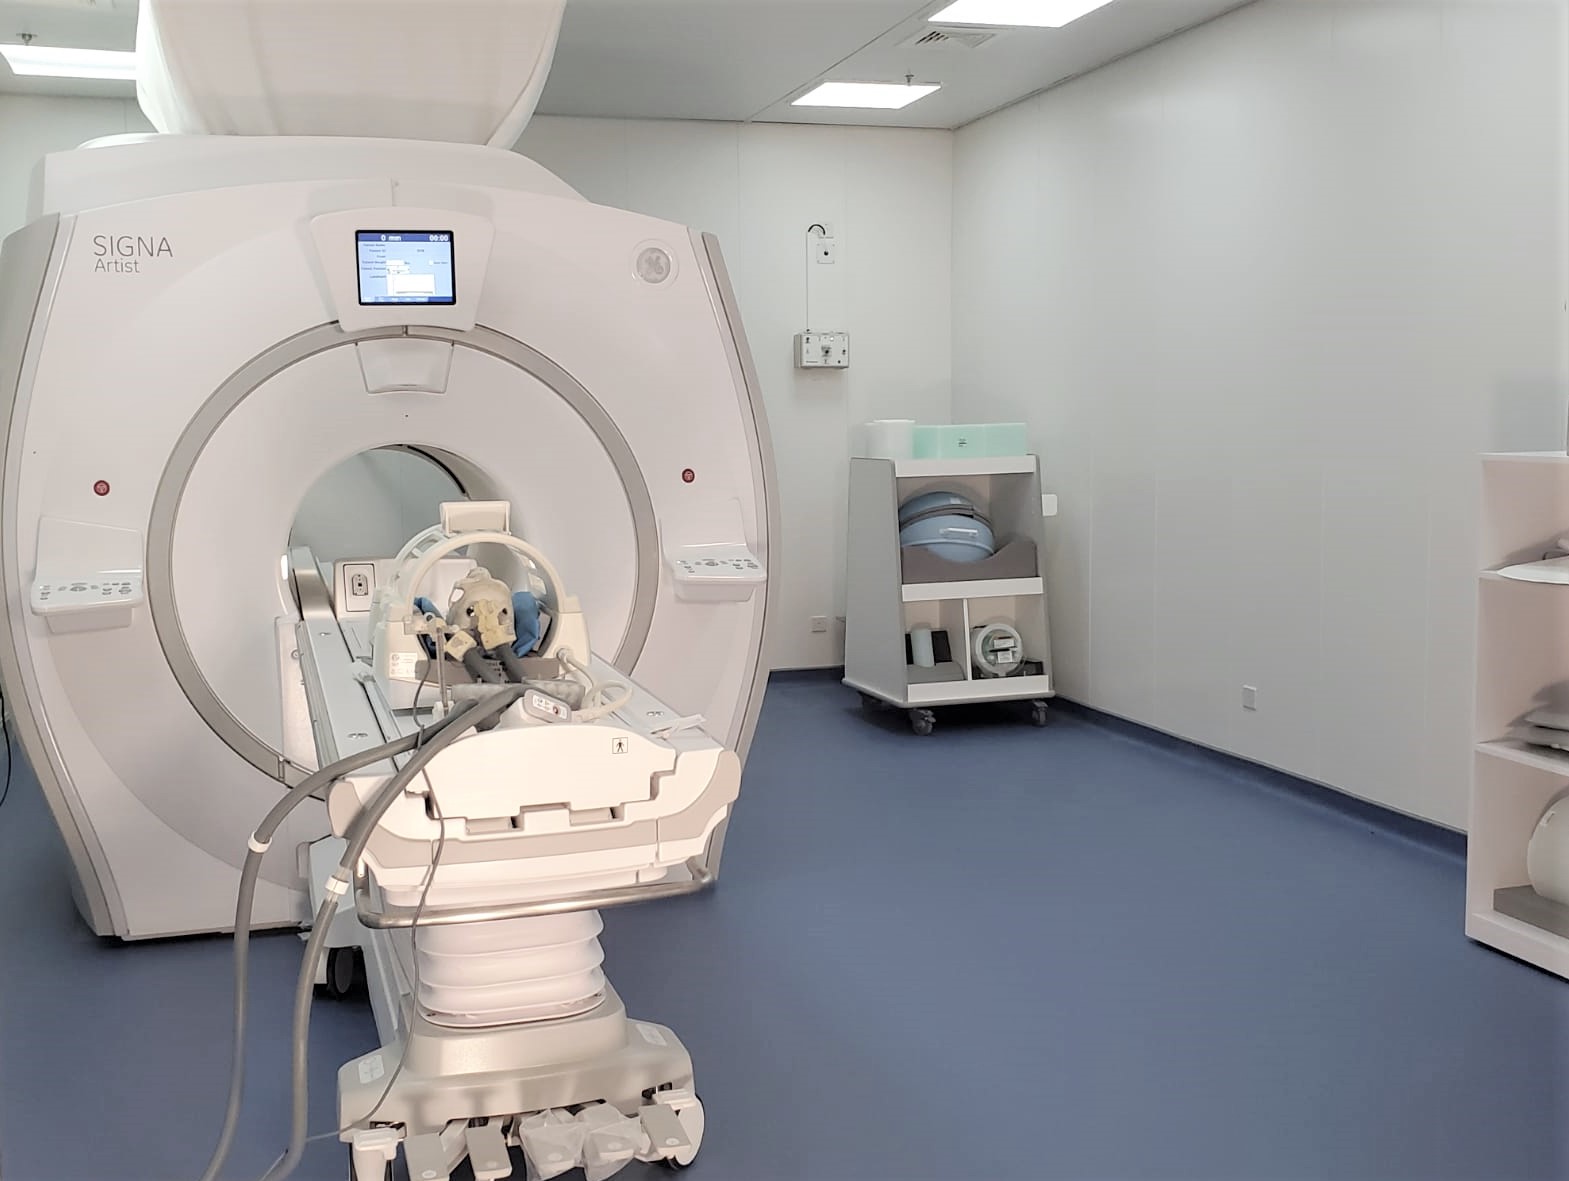 Intra-operative MRI-guided robot for bilateral stereotactic neurosurgery